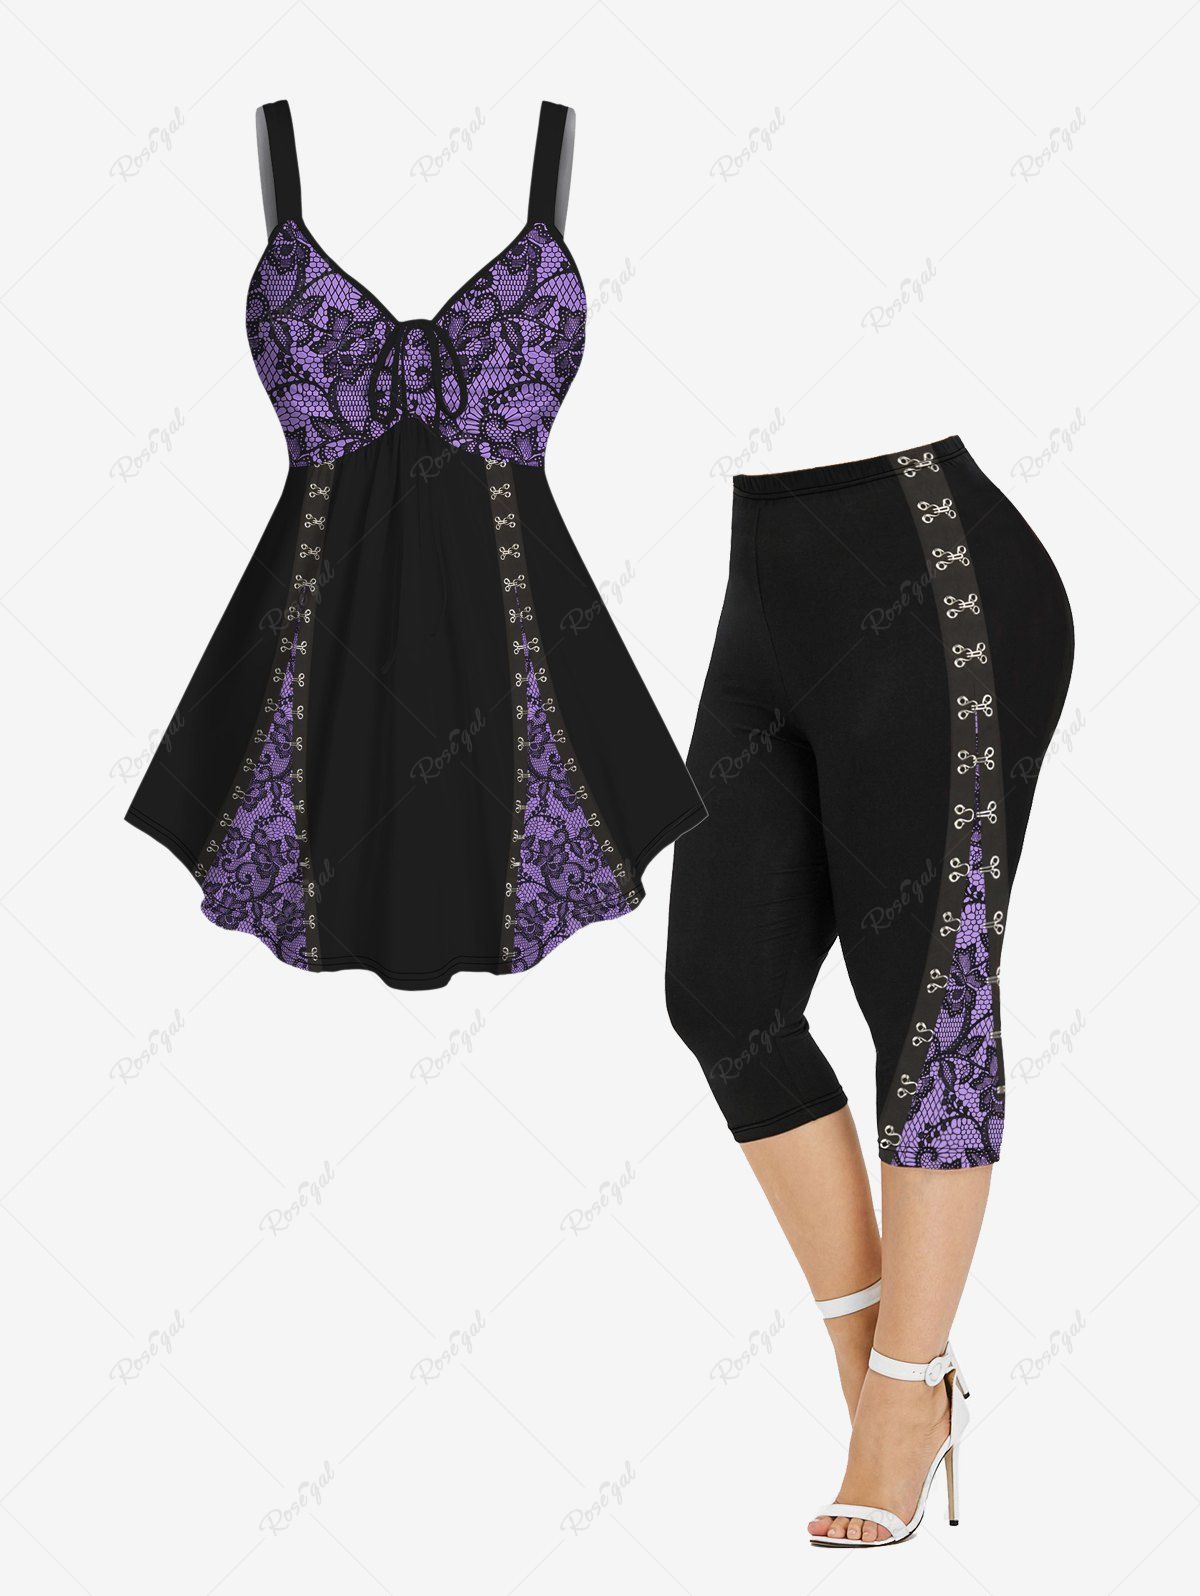 Chic Hook and Eye Floral Lace 3D Print Cinched Tank Top and Capri Leggings Plus Size Outfits  